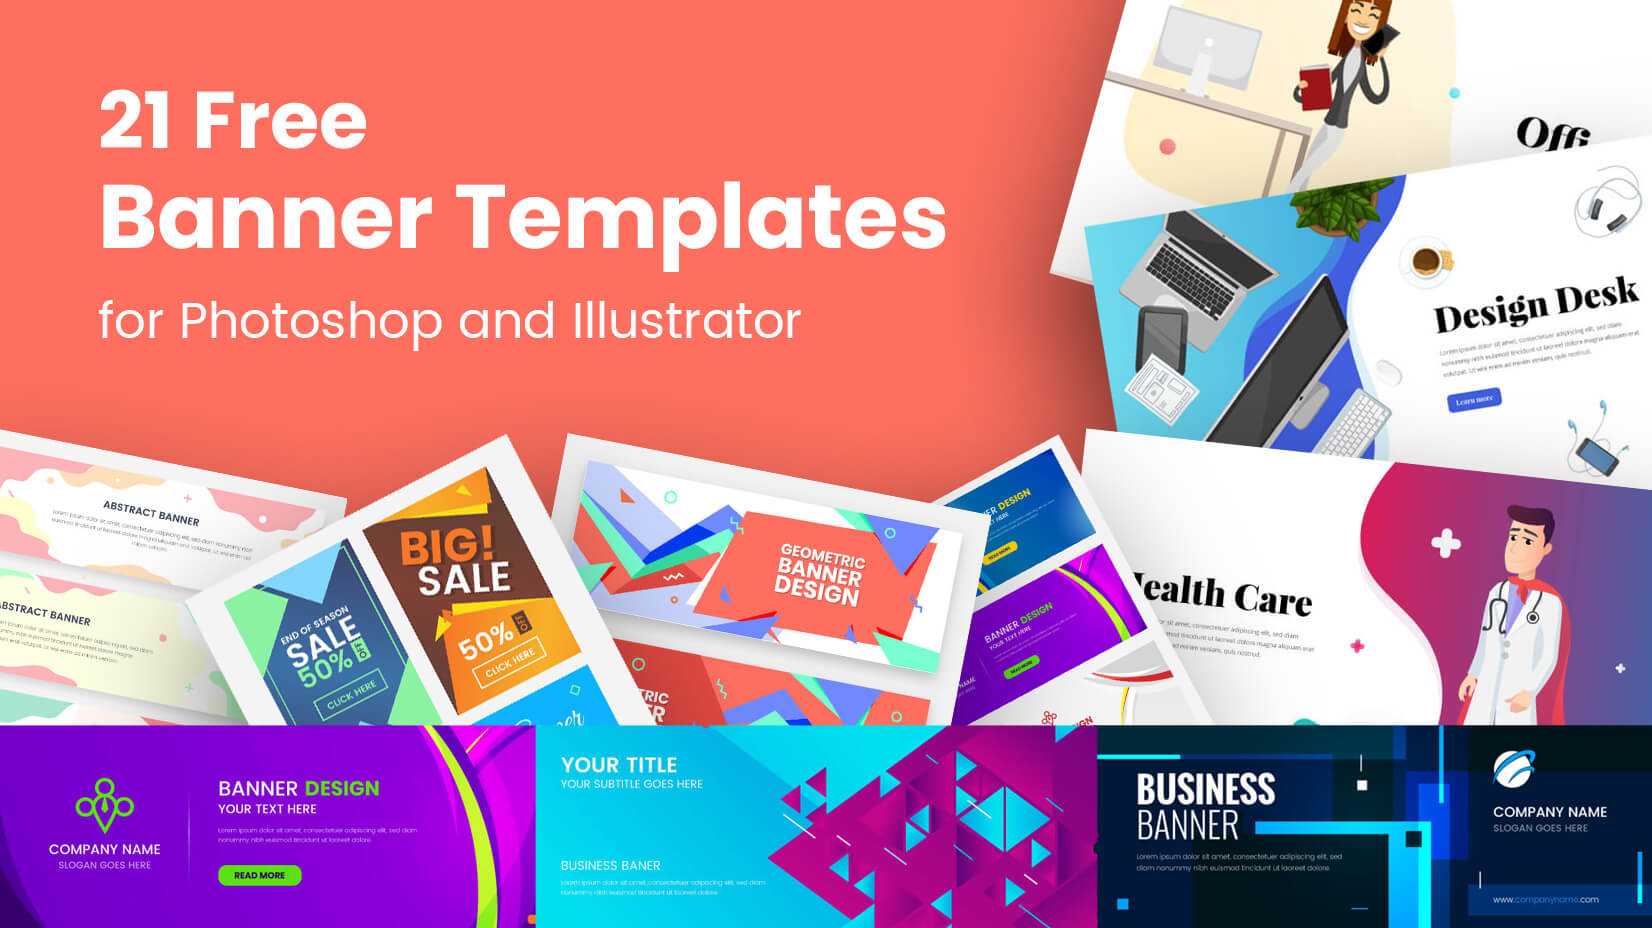 21 Free Banner Templates For Photoshop And Illustrator Intended For Website Banner Templates Free Download